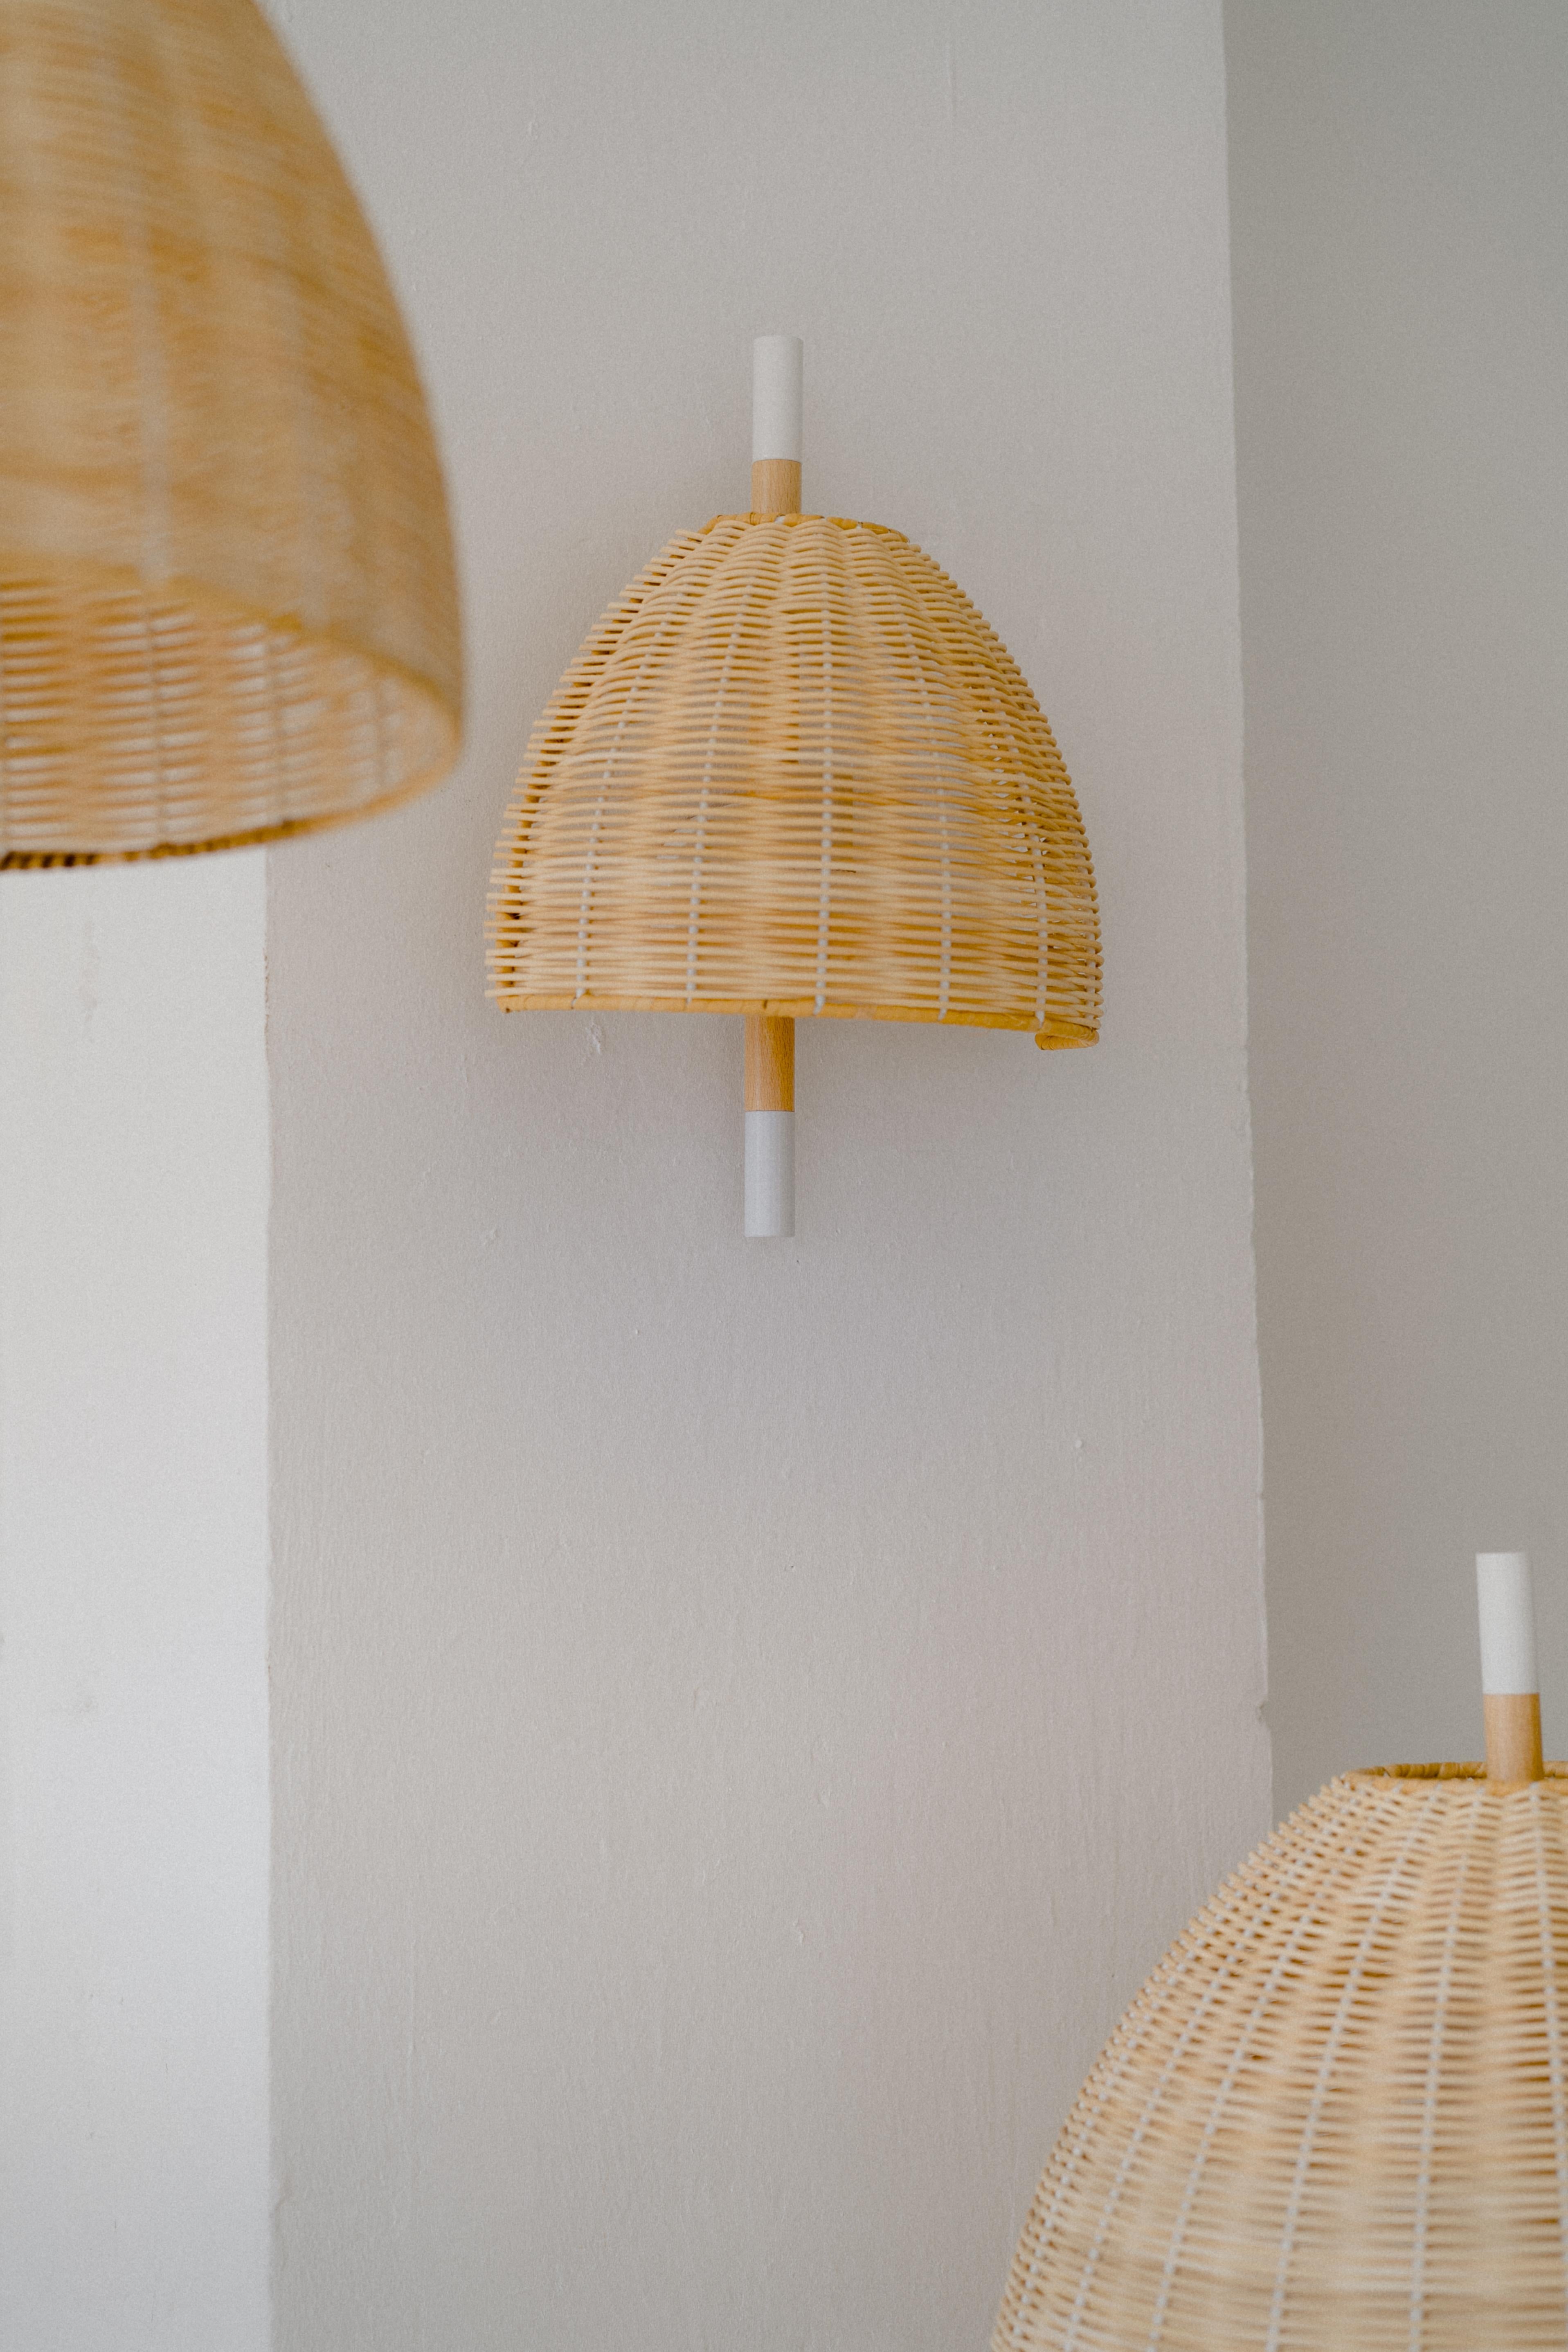 AMÀ LAMP
Amà, comes from the Catalan ''a mà'', which means ''handmade'', and it is how this contemporary lamp is made. With hand-turned beech wood, white metal details, and hand-woven lampshade in natural rattan.
Mediterranean, simple,